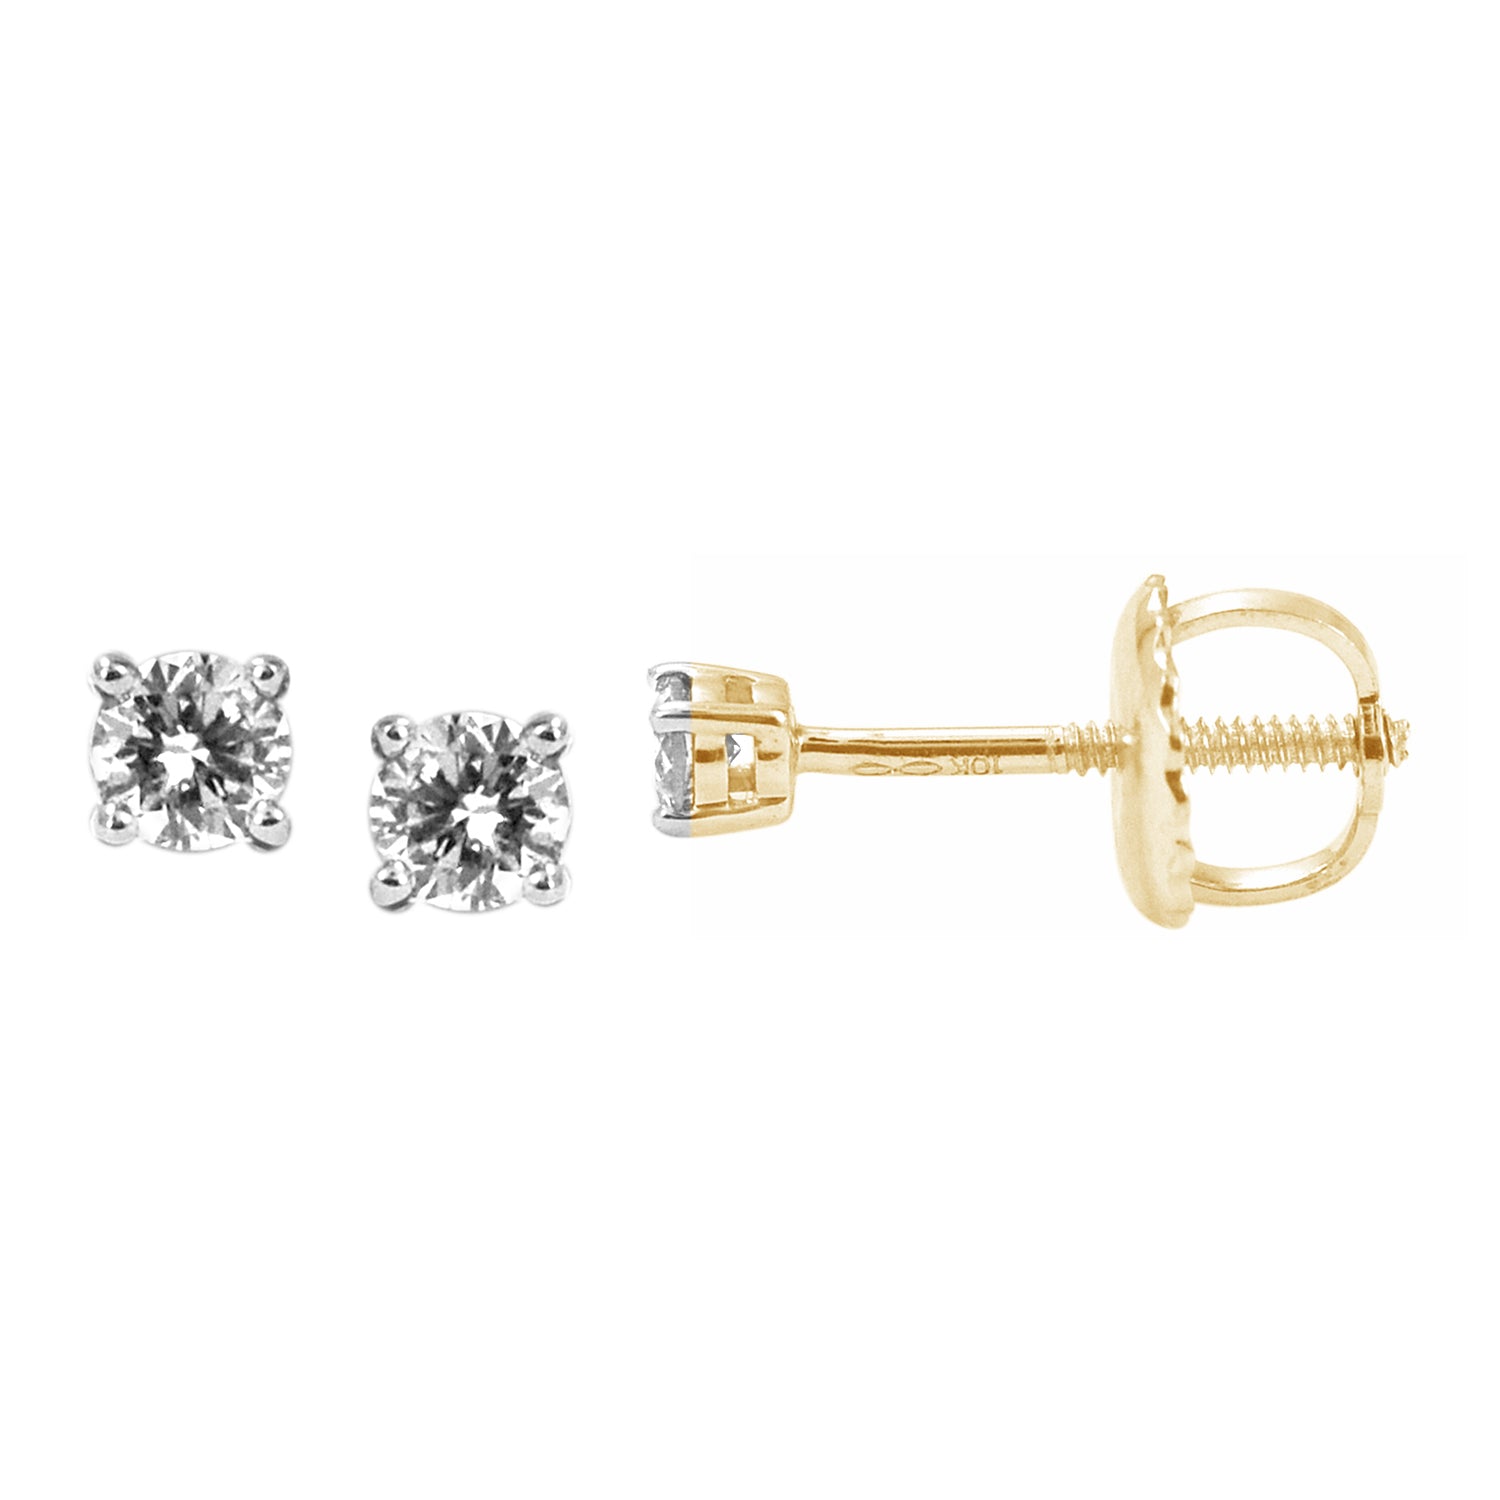 Round Studs / Earrings With 0.08 Carat TW Of Diamonds In 10K Yellow Gold